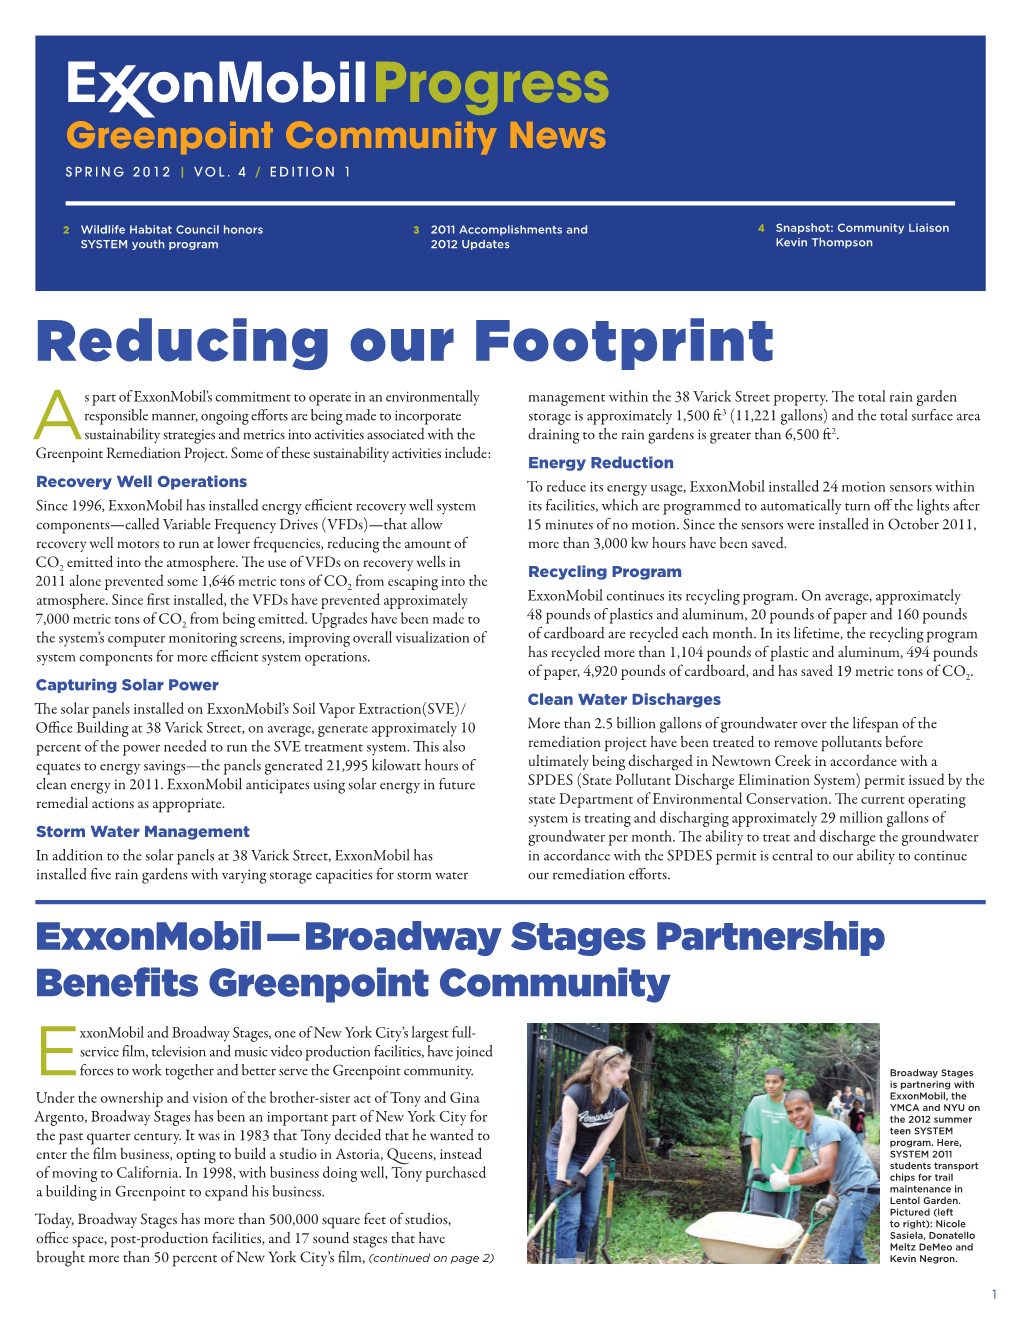 Reducing Our Footprint S Part of Exxonmobil’S Commitment to Operate in an Environmentally Management Within the 38 Varick Street Property